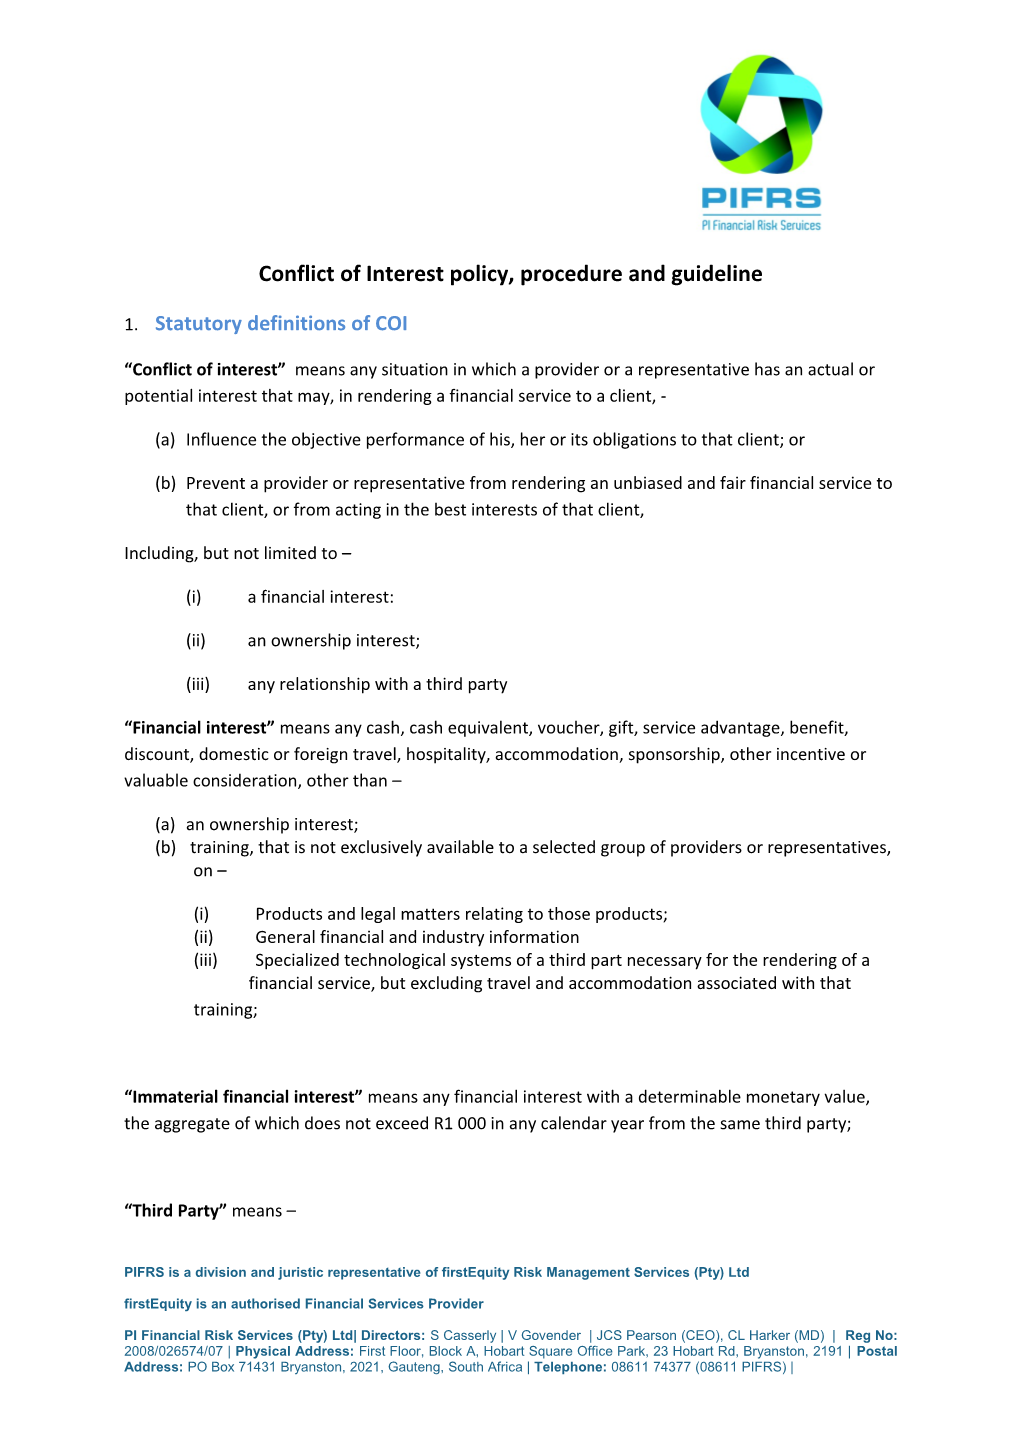 Conflict of Interest Policy, Procedure and Guideline